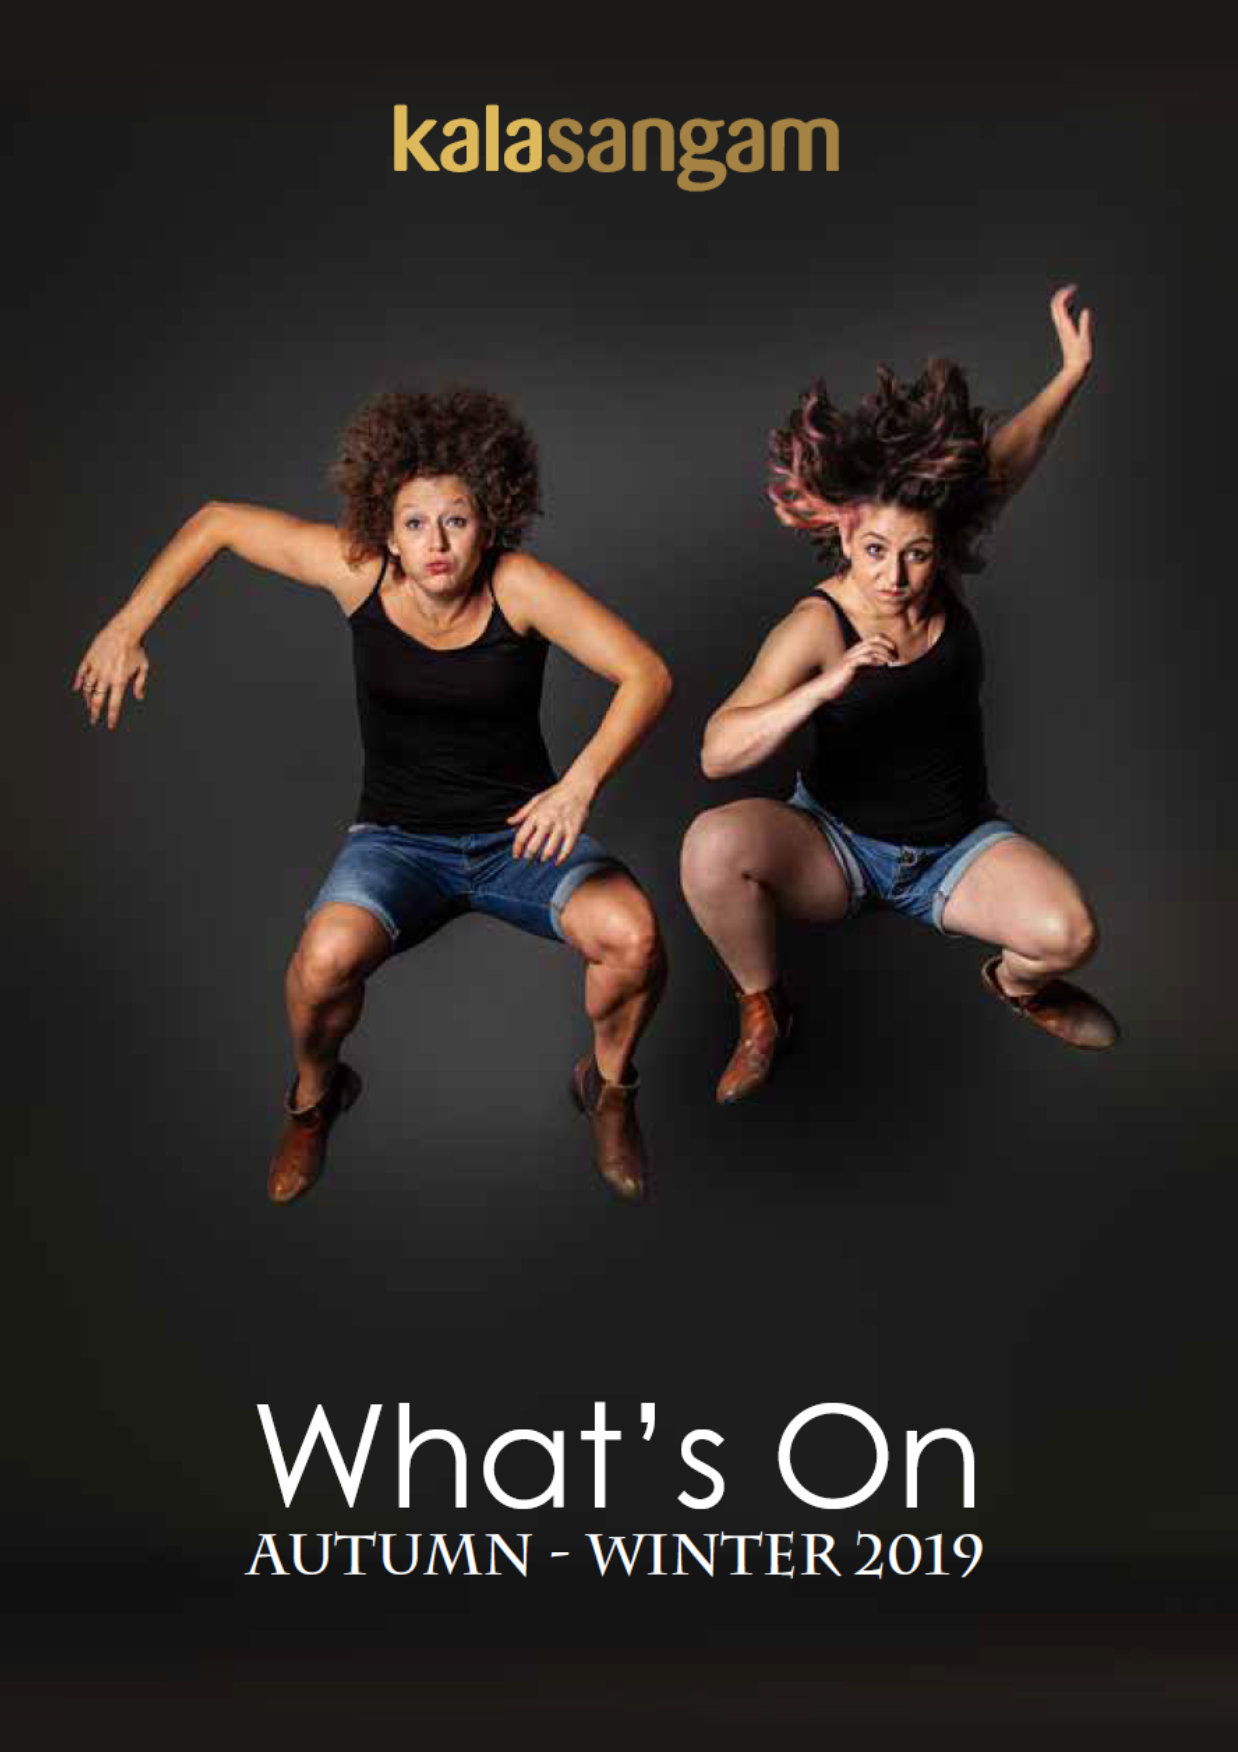 two performers on the front cover of What's on autumn - winter 2019